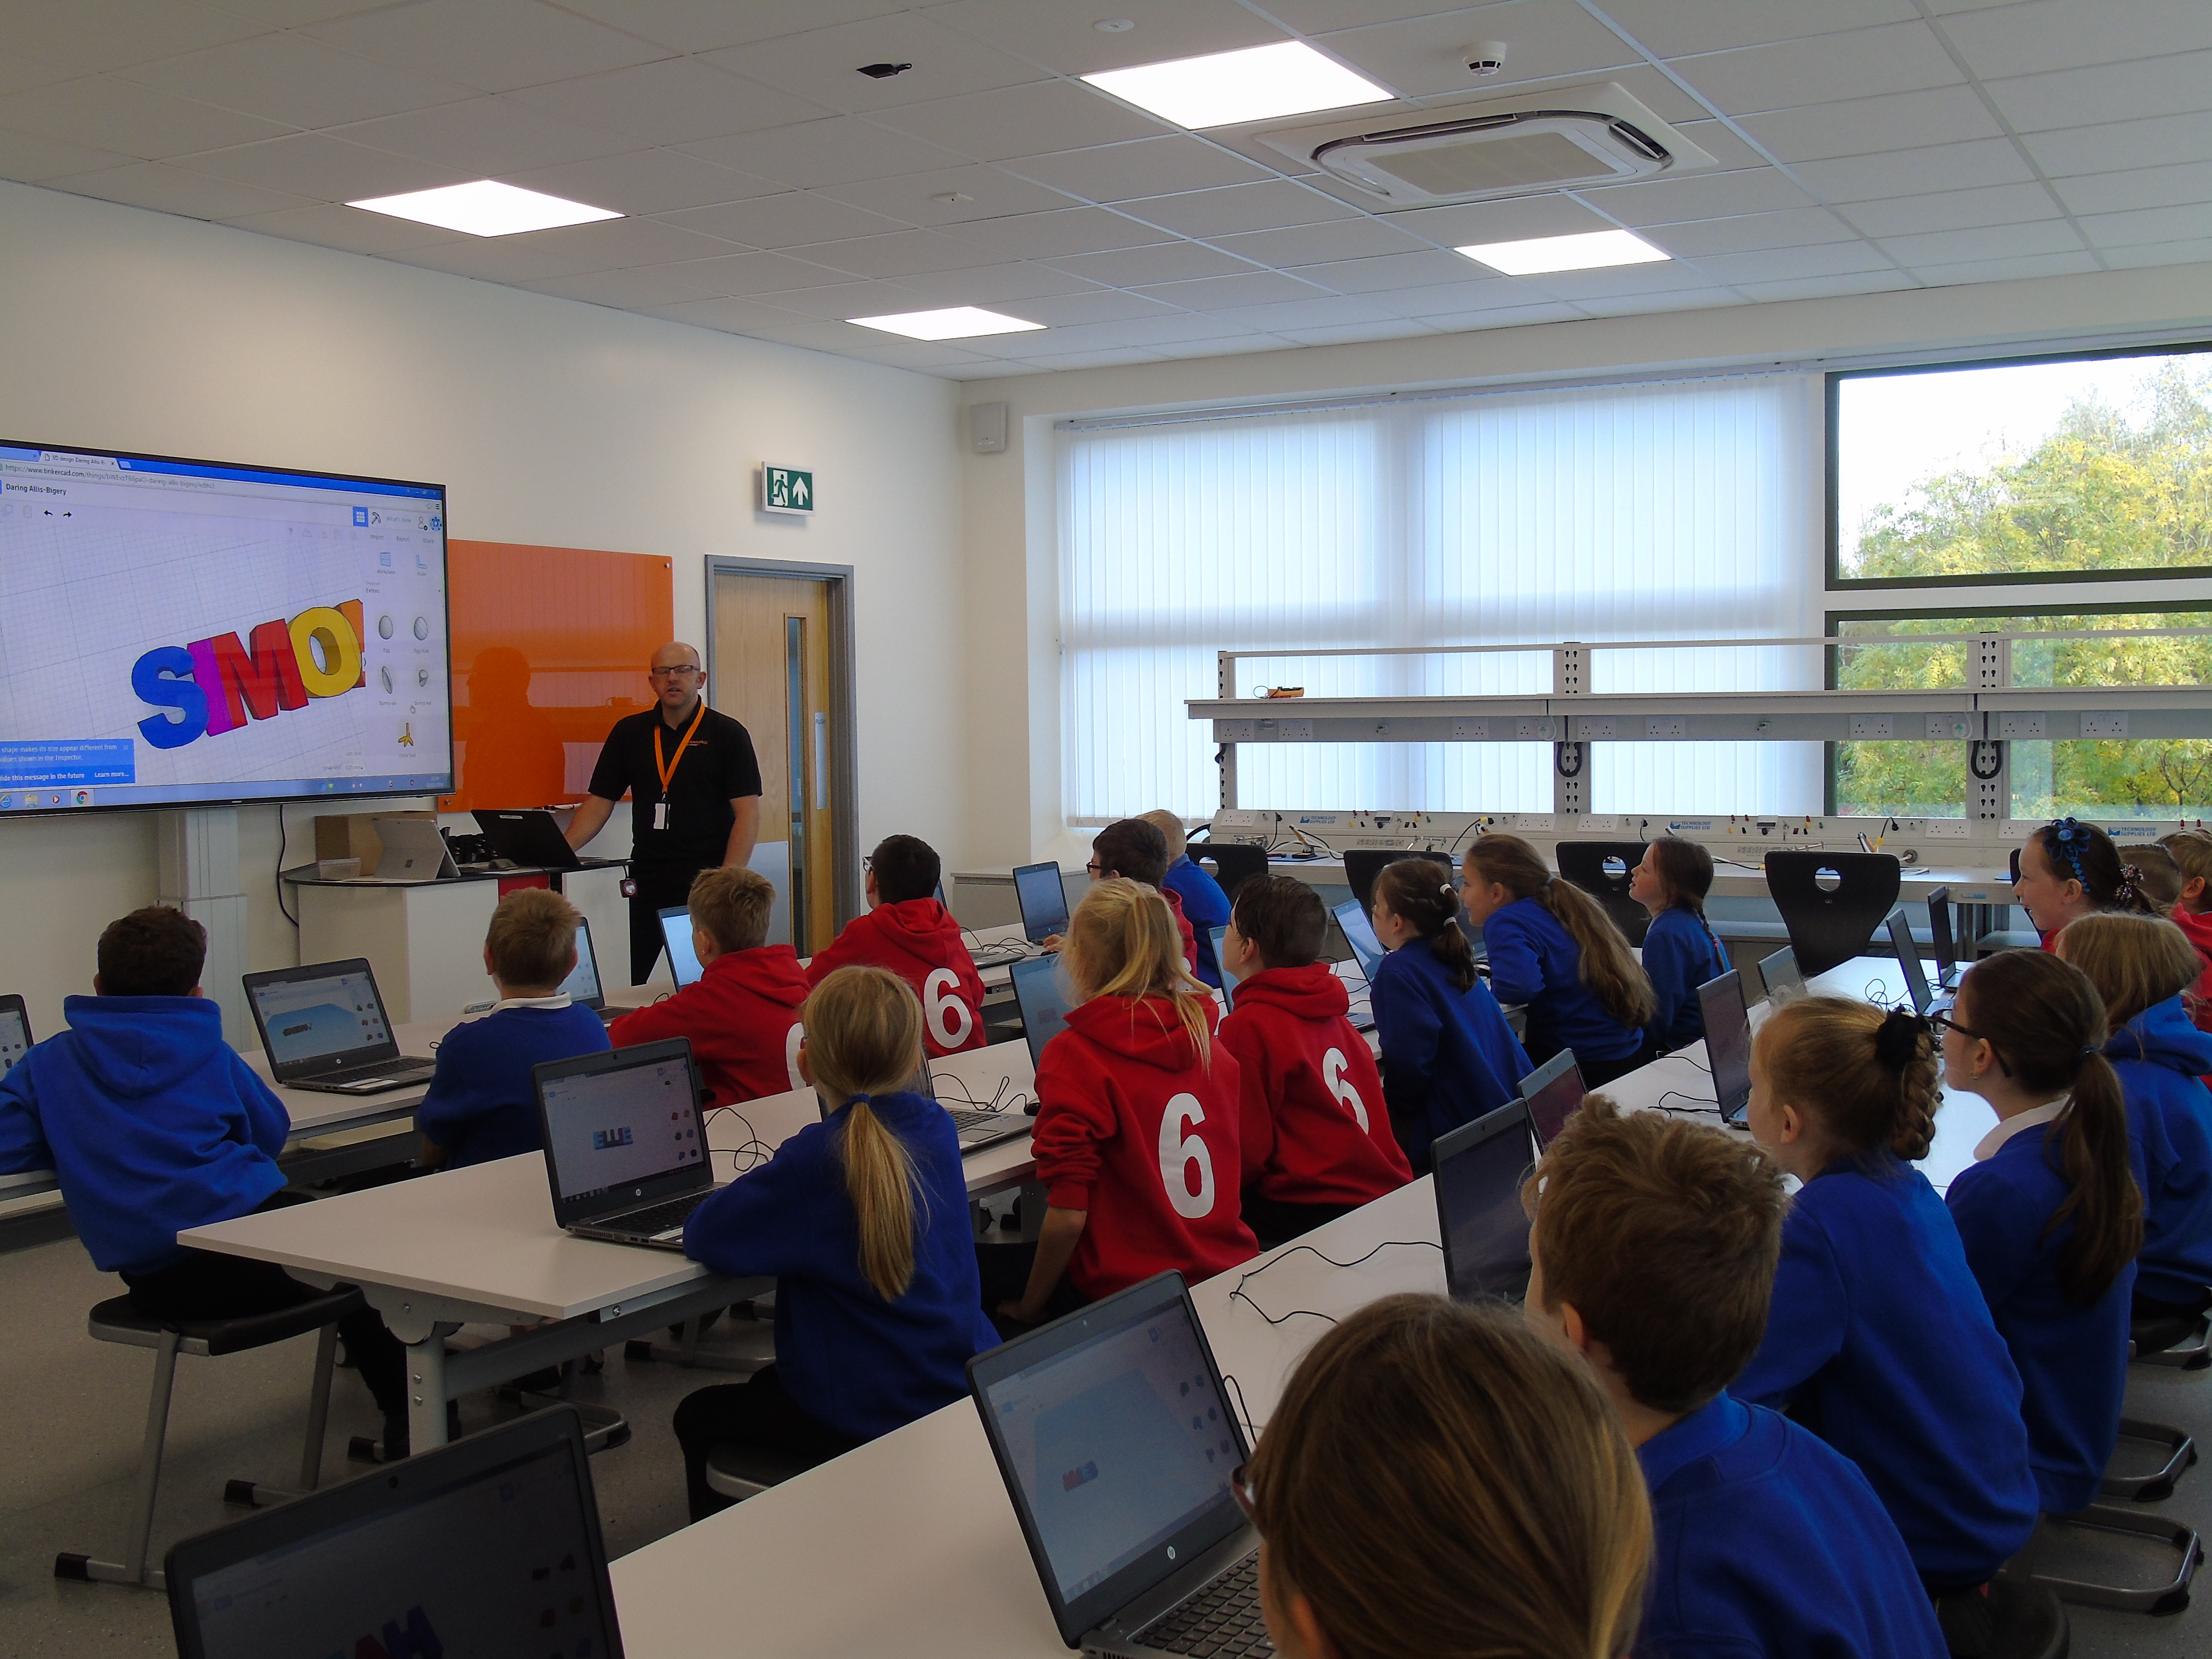 Working with schools at an education facility in South Wales.